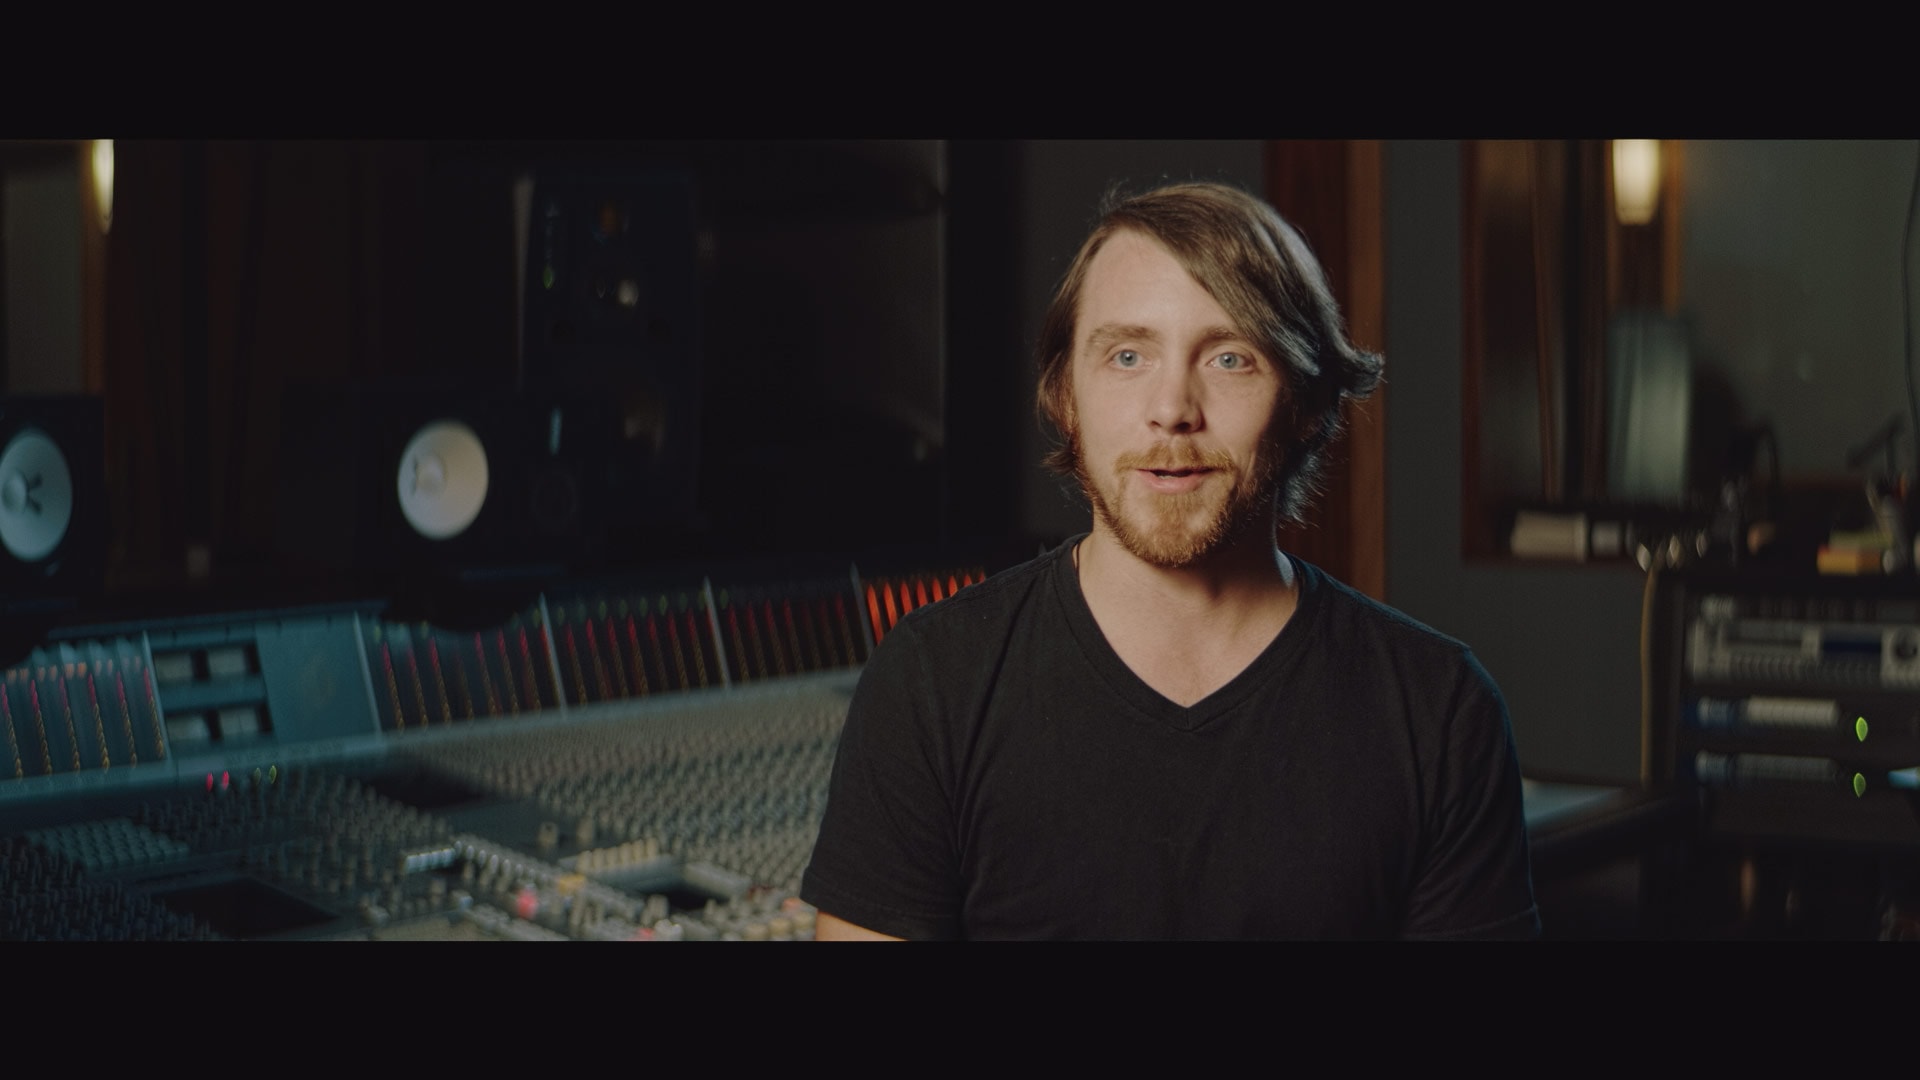 A musician in the studio in a branded documentary video